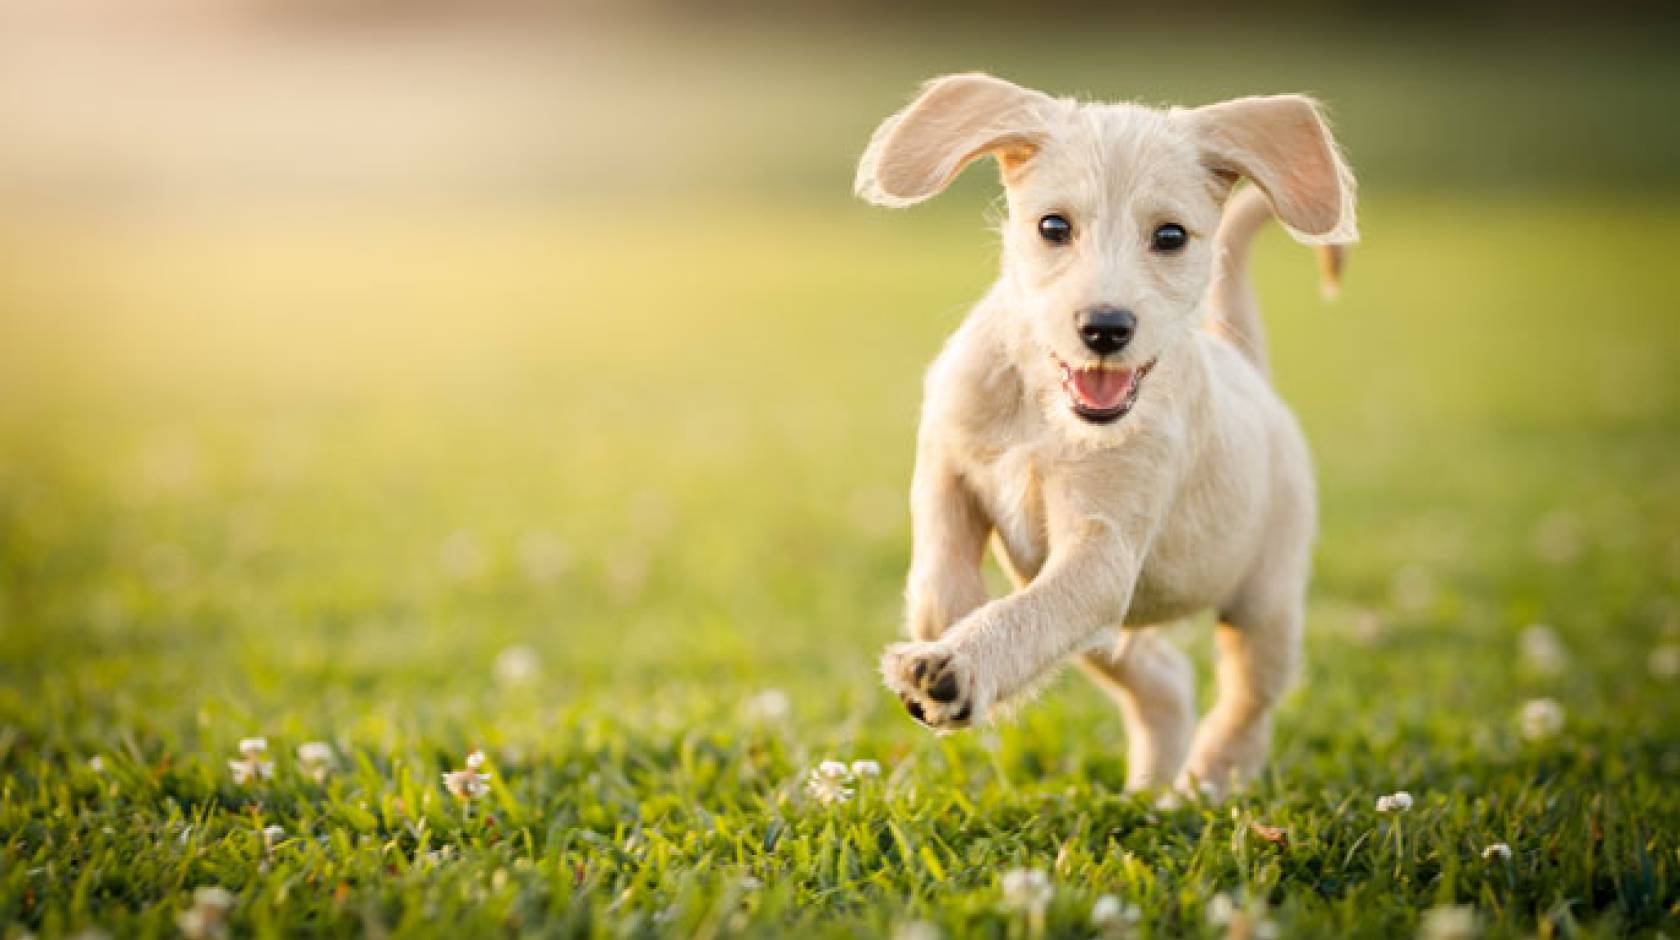 Puppy playing on a green lawn